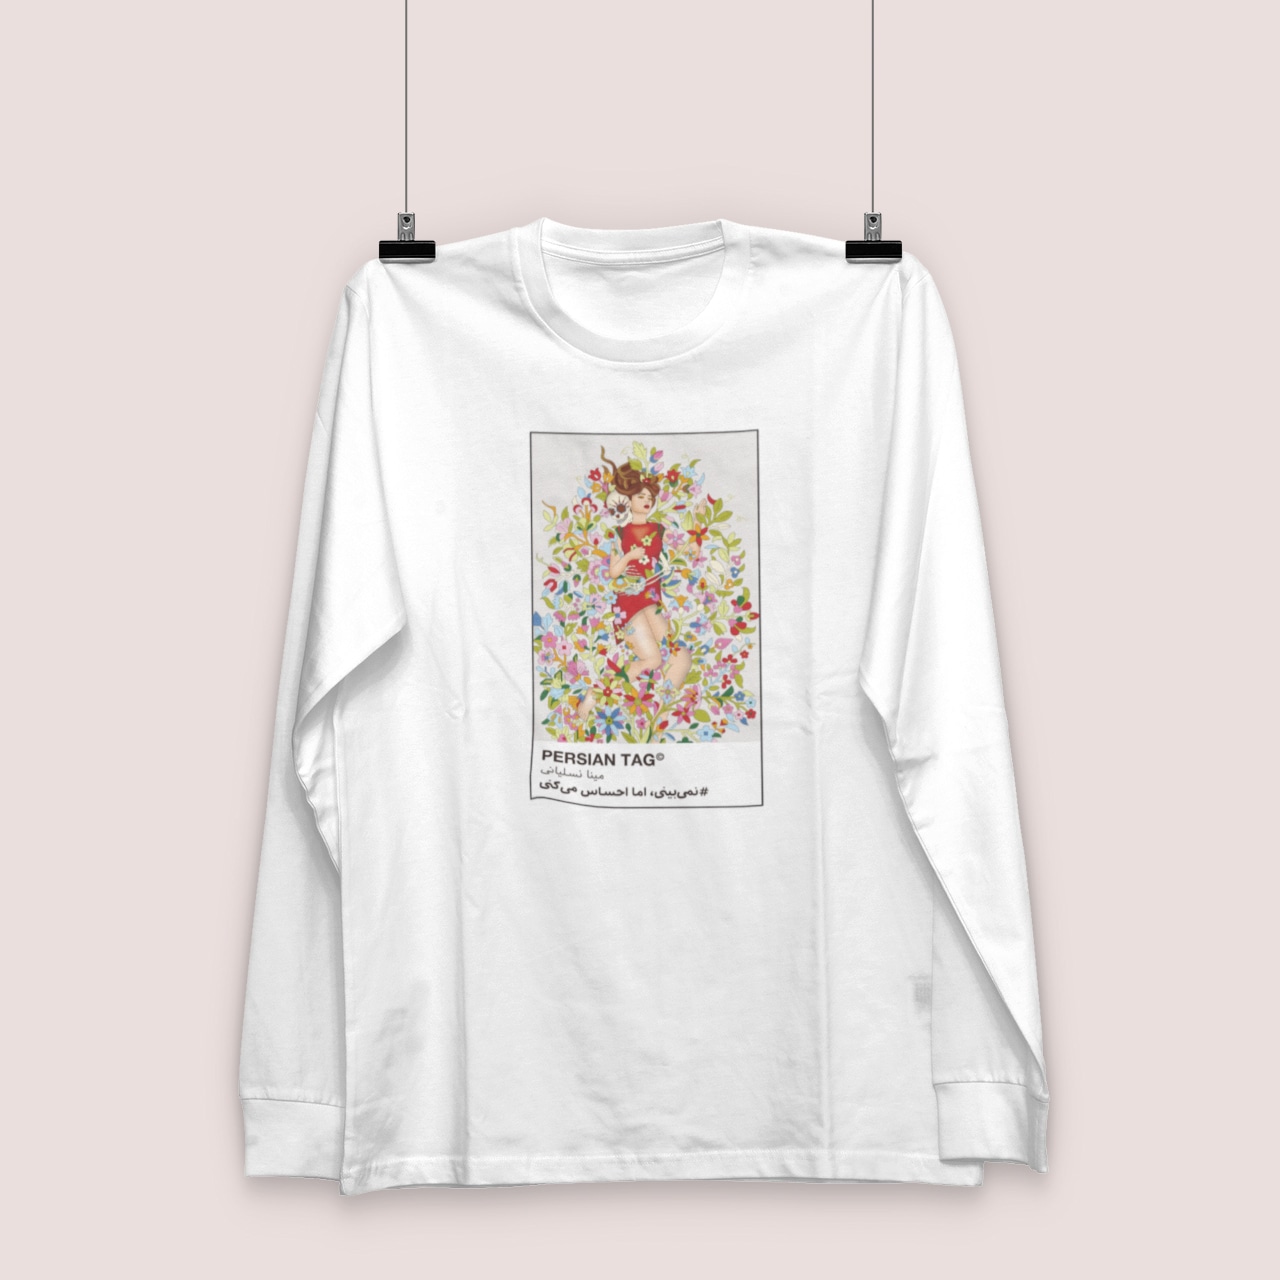 You can't see, but you can feel by Mina / ロングスリーブTシャツ